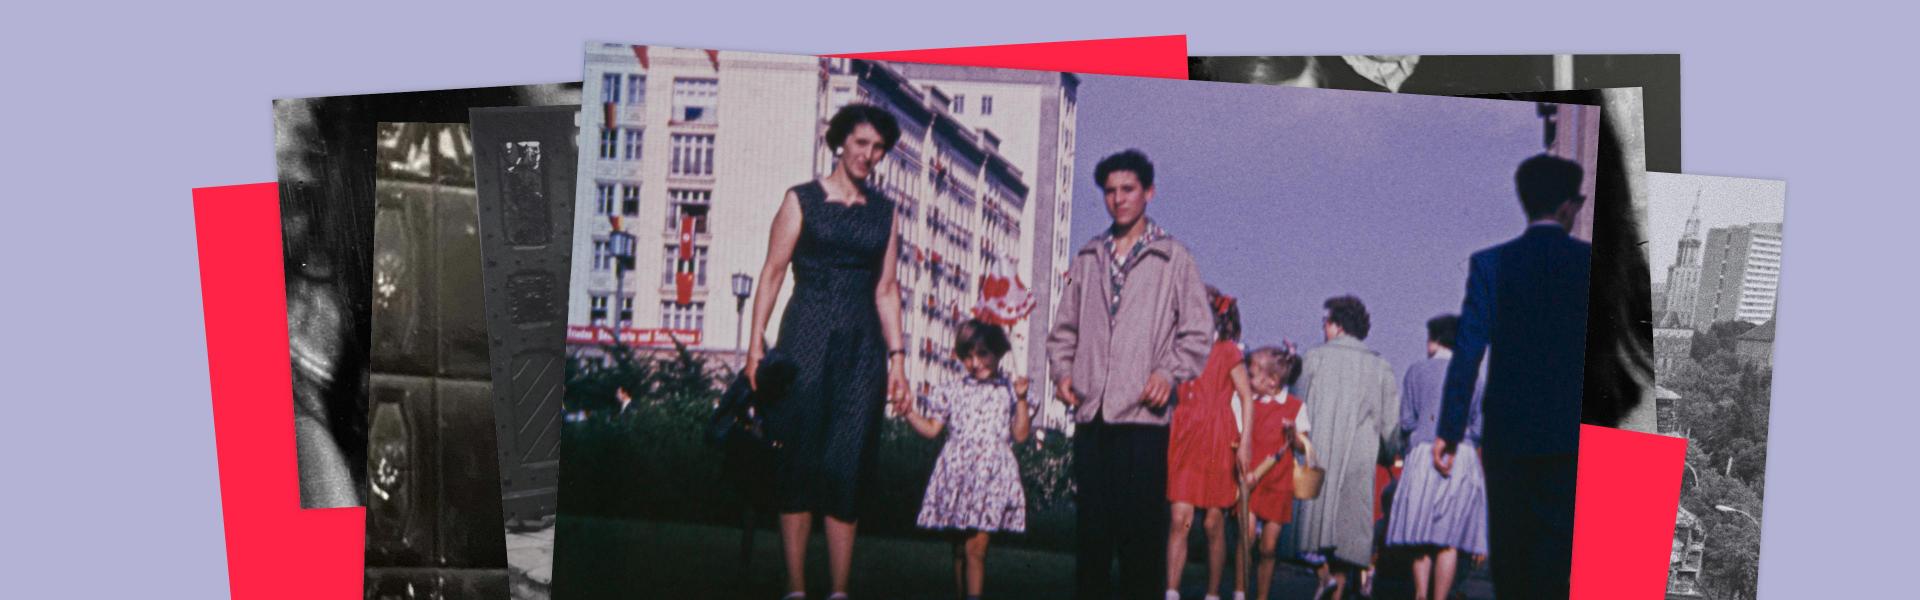 Designed graphic with overlapping photos and red squares, the top photo shows a woman with a child holding her hand, next to her a teenager, in the background the so-called workers' palaces in Stalinallee.